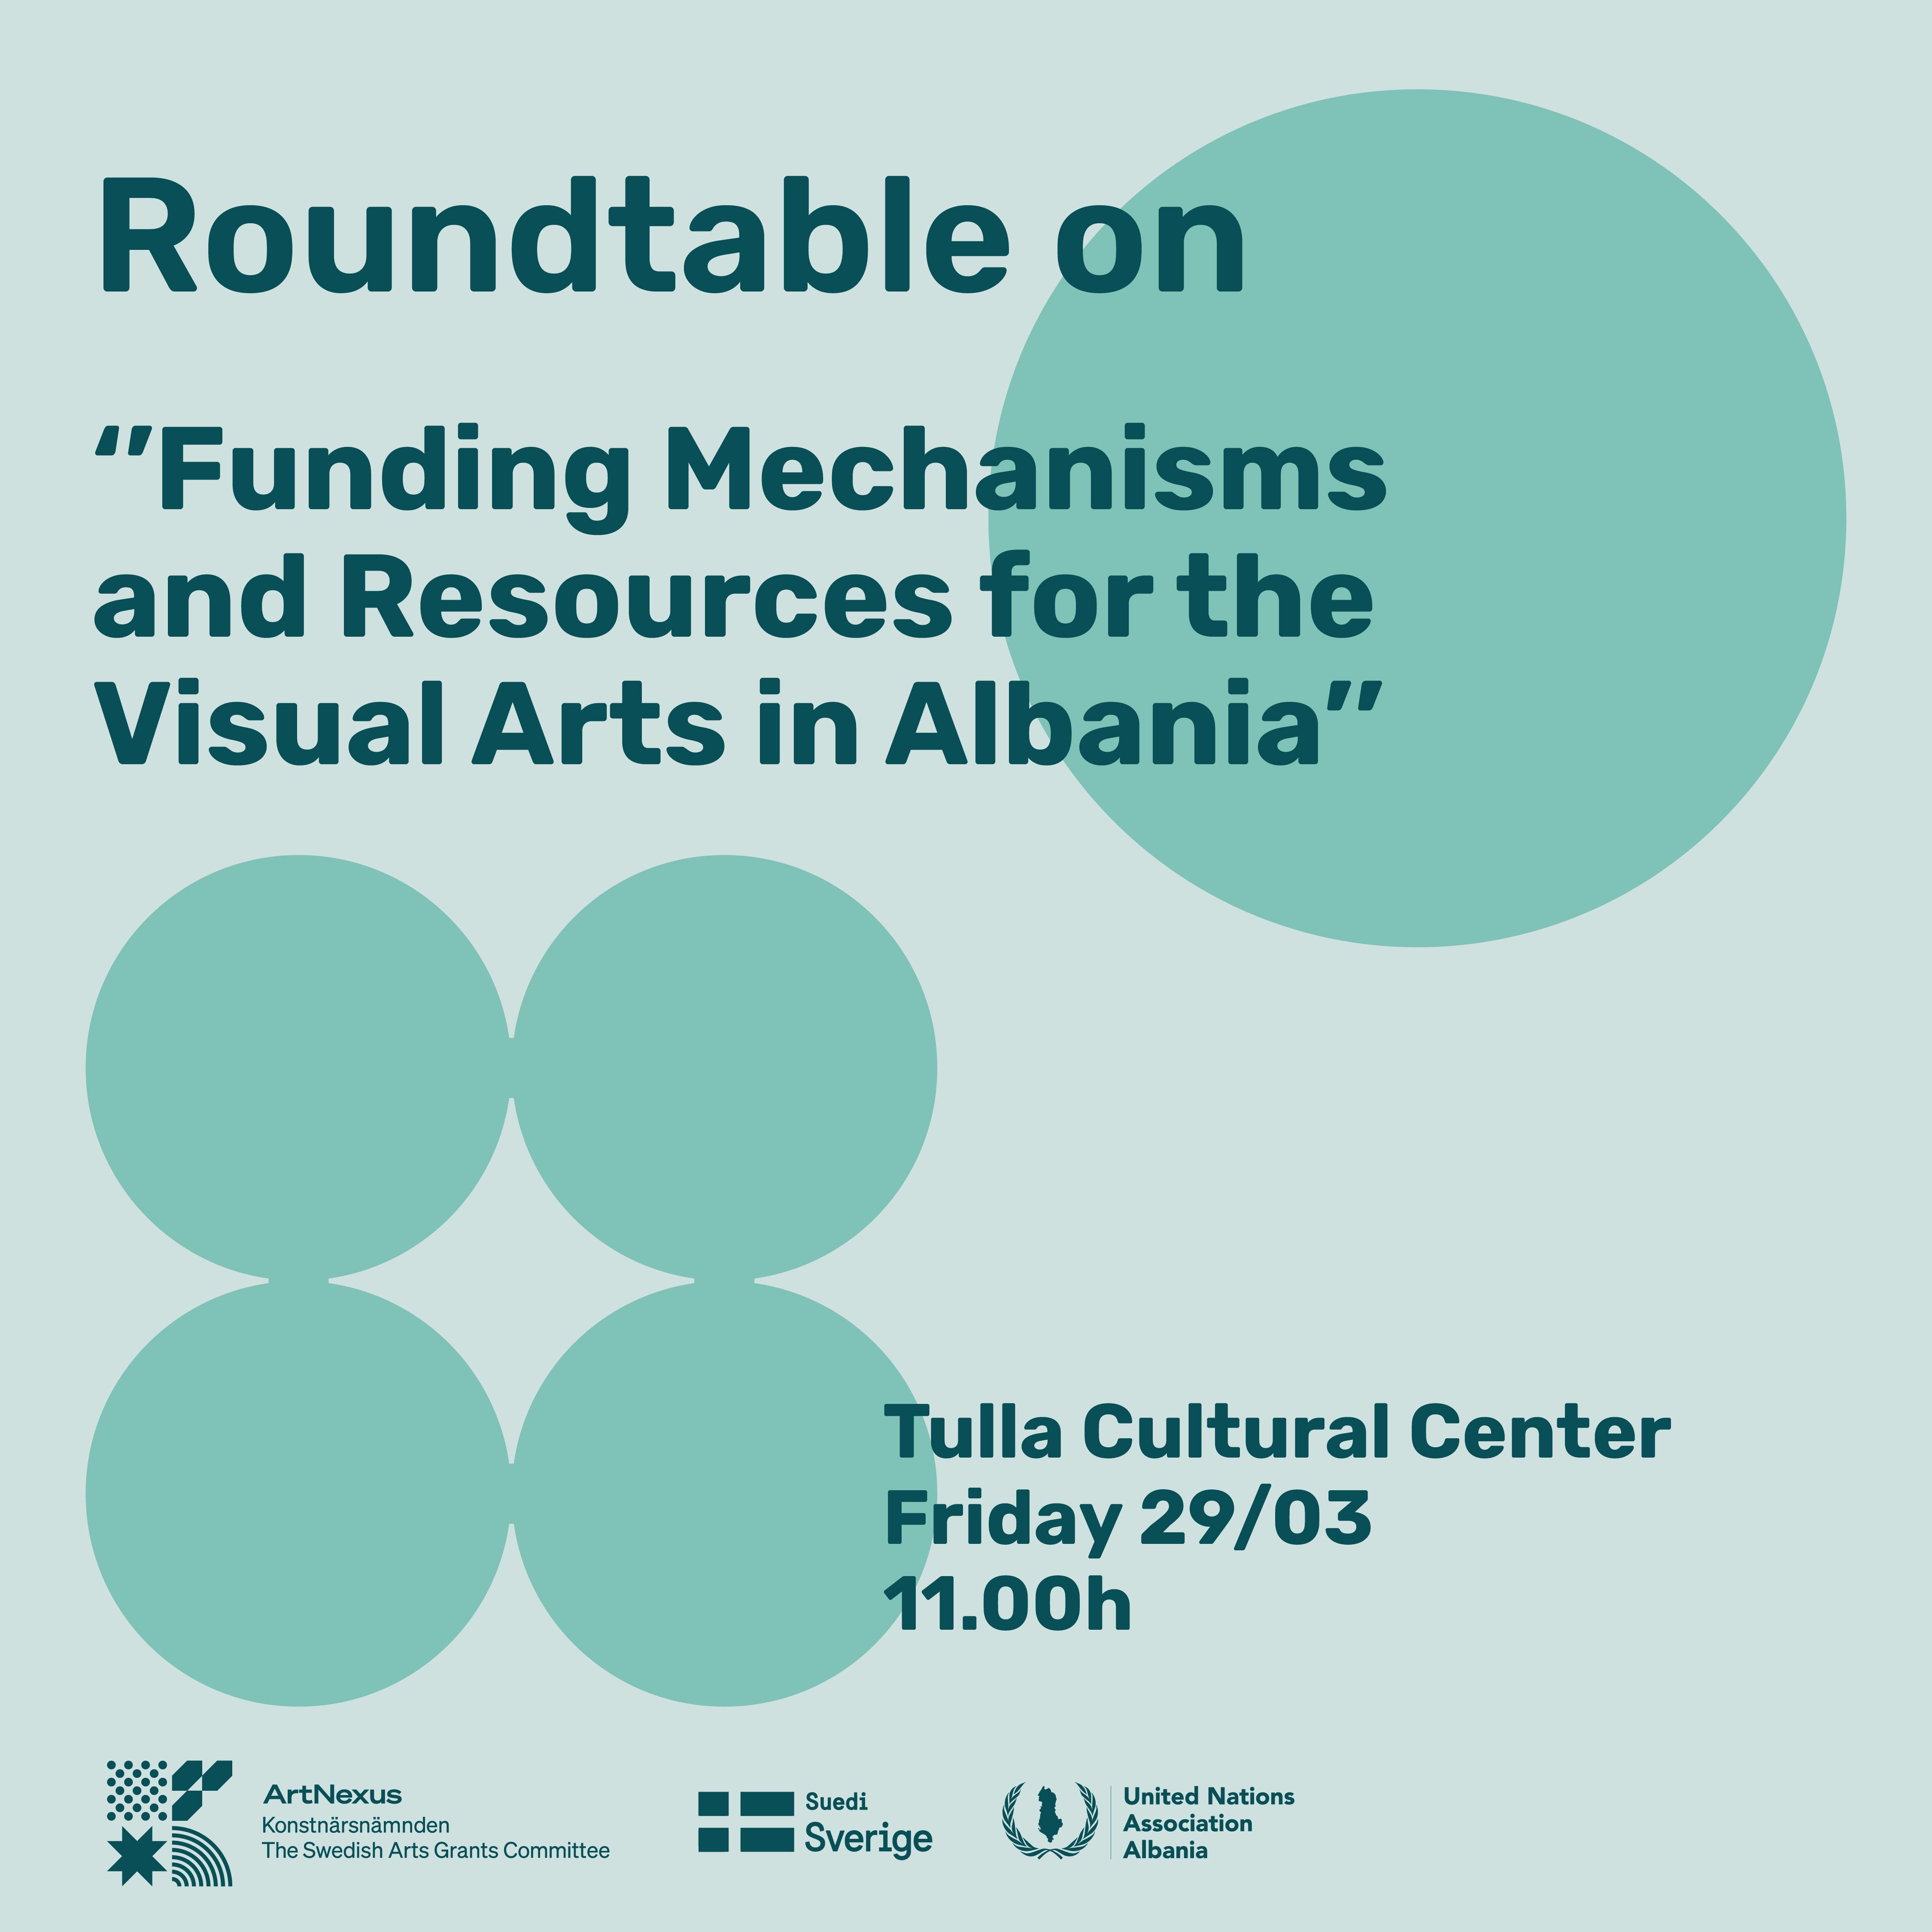 Funding Mechanisms and Resources for the Visual Arts in Albania